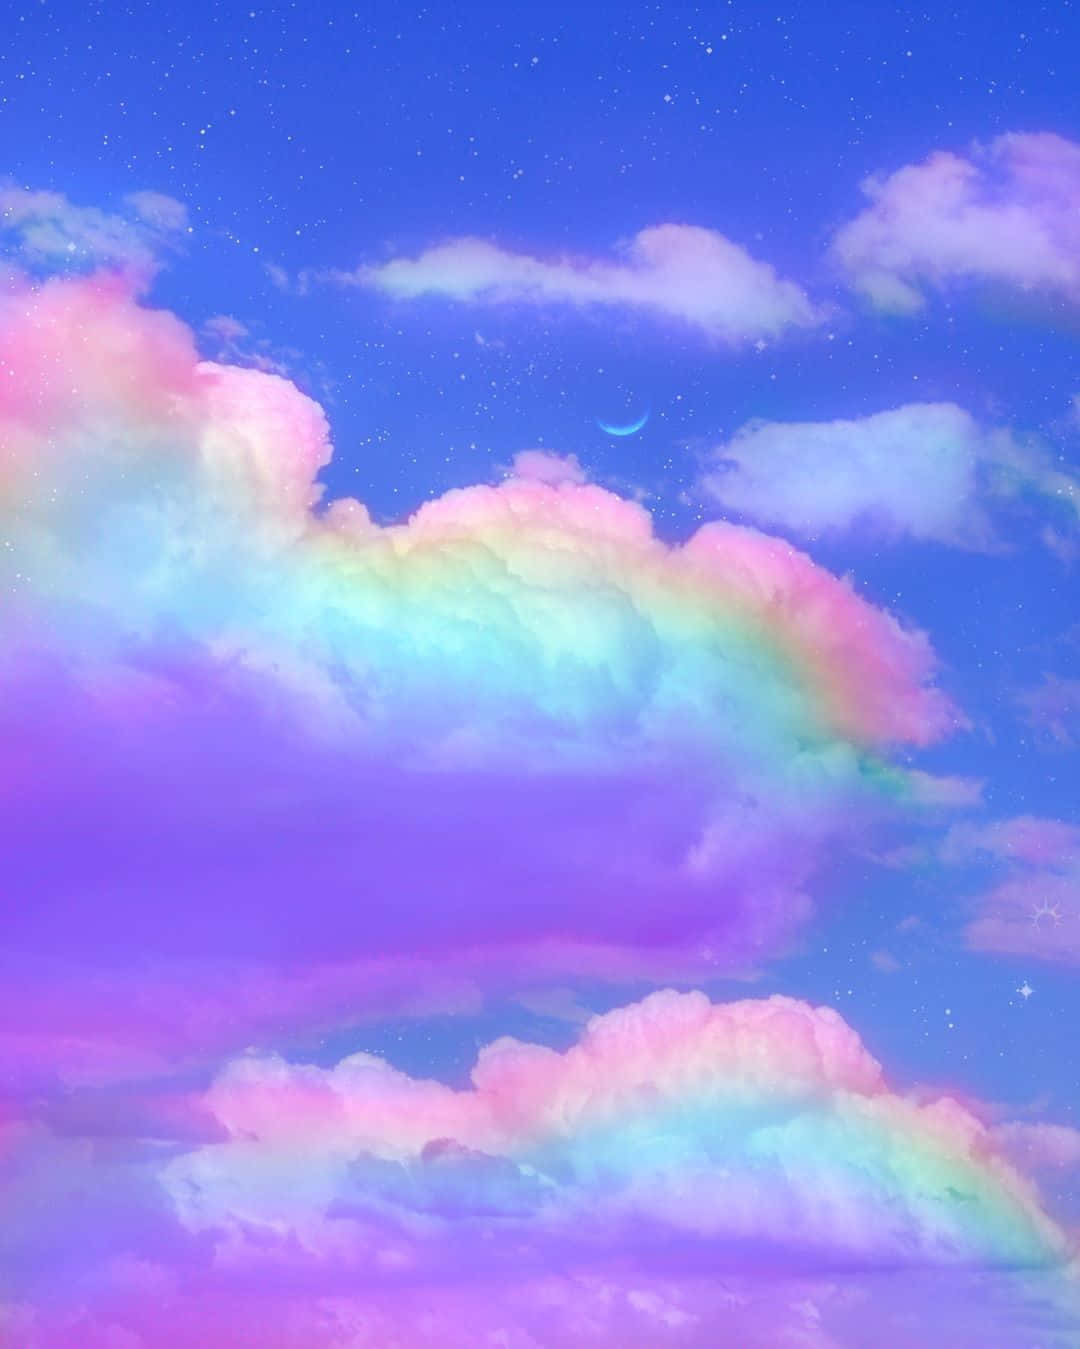 Aesthetic Cloud Wallpaper Background Wallpaper Image For Free Download -  Pngtree